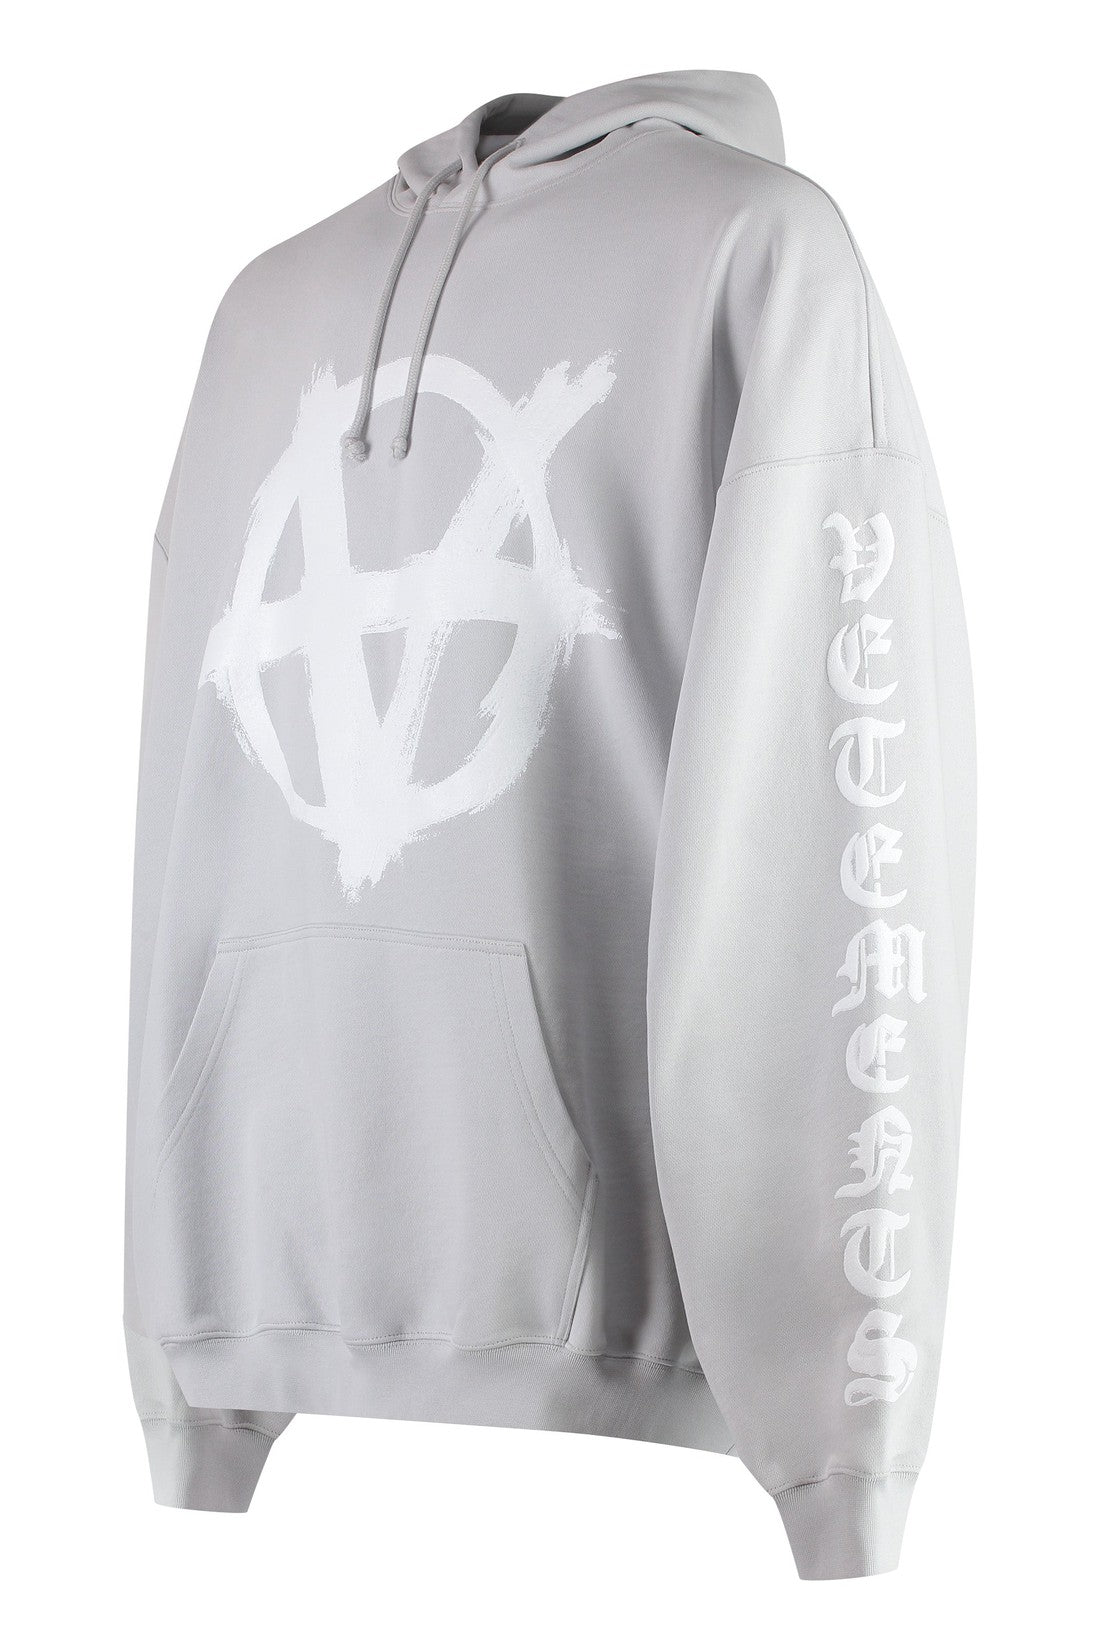 Reverse Anarchy cotton hoodie